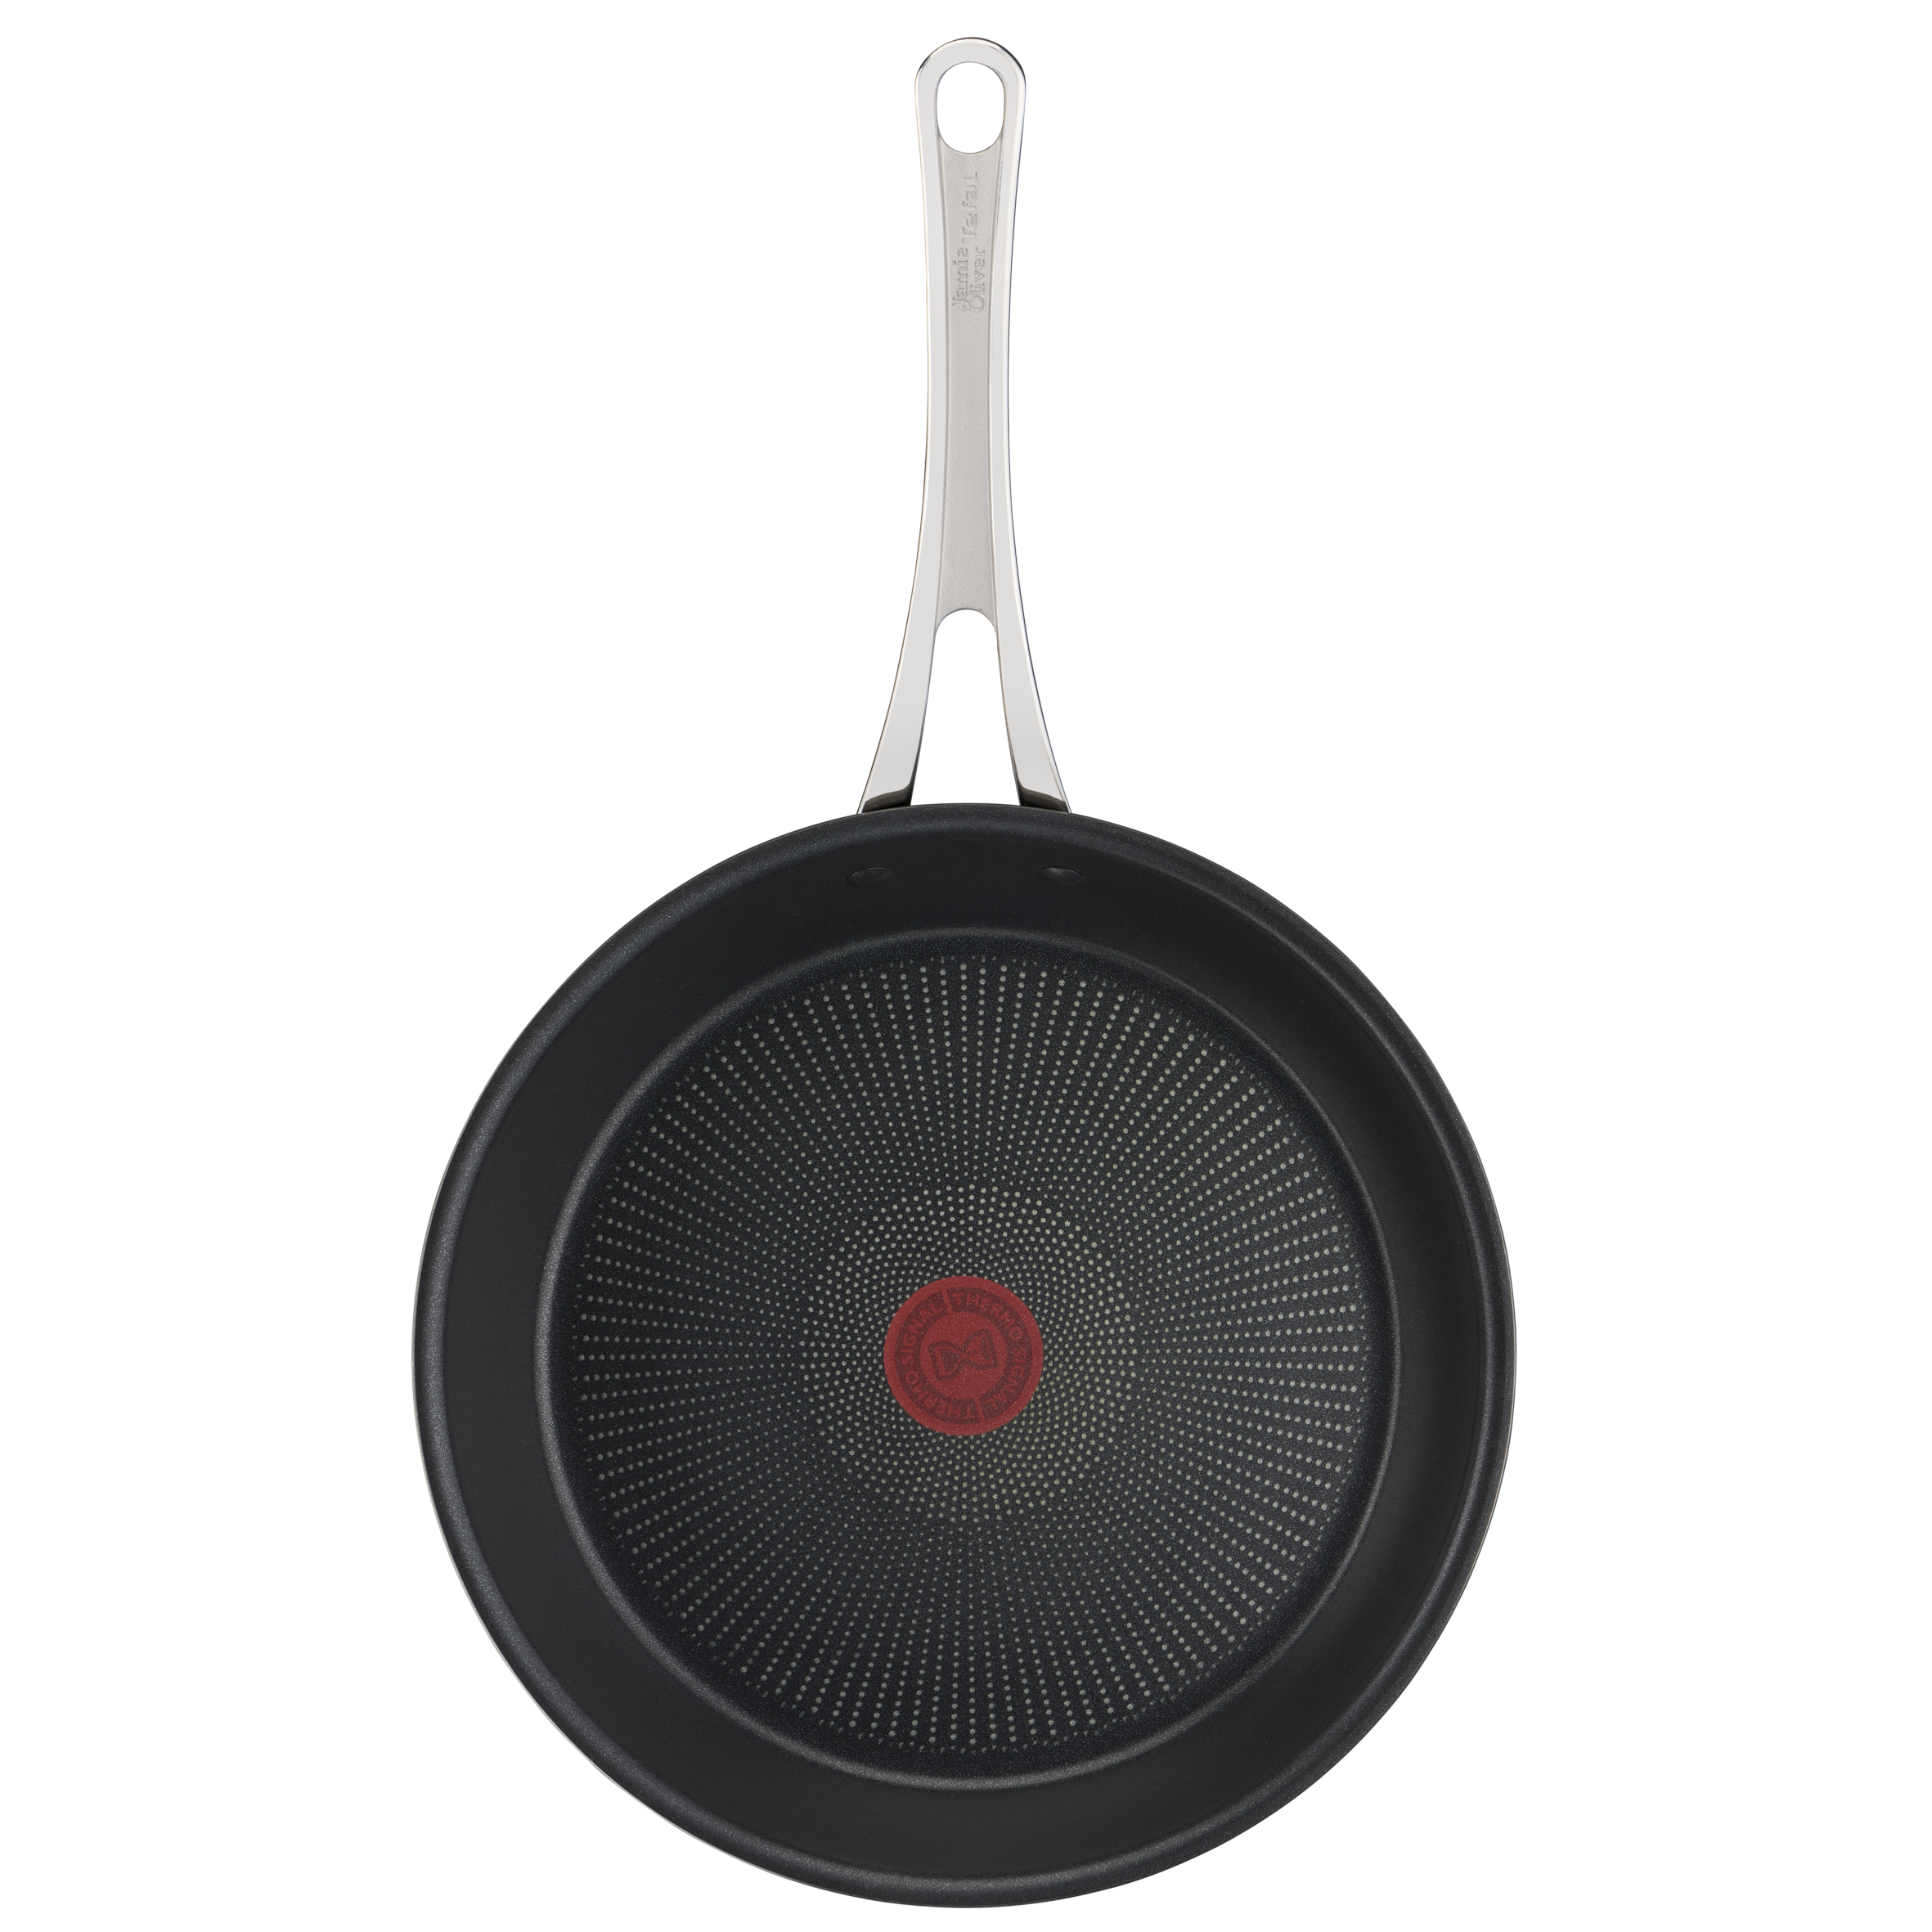 Jamie Oliver by Tefal Cooks Classic Non-Stick Induction Hard Anodised Frypan 24cm